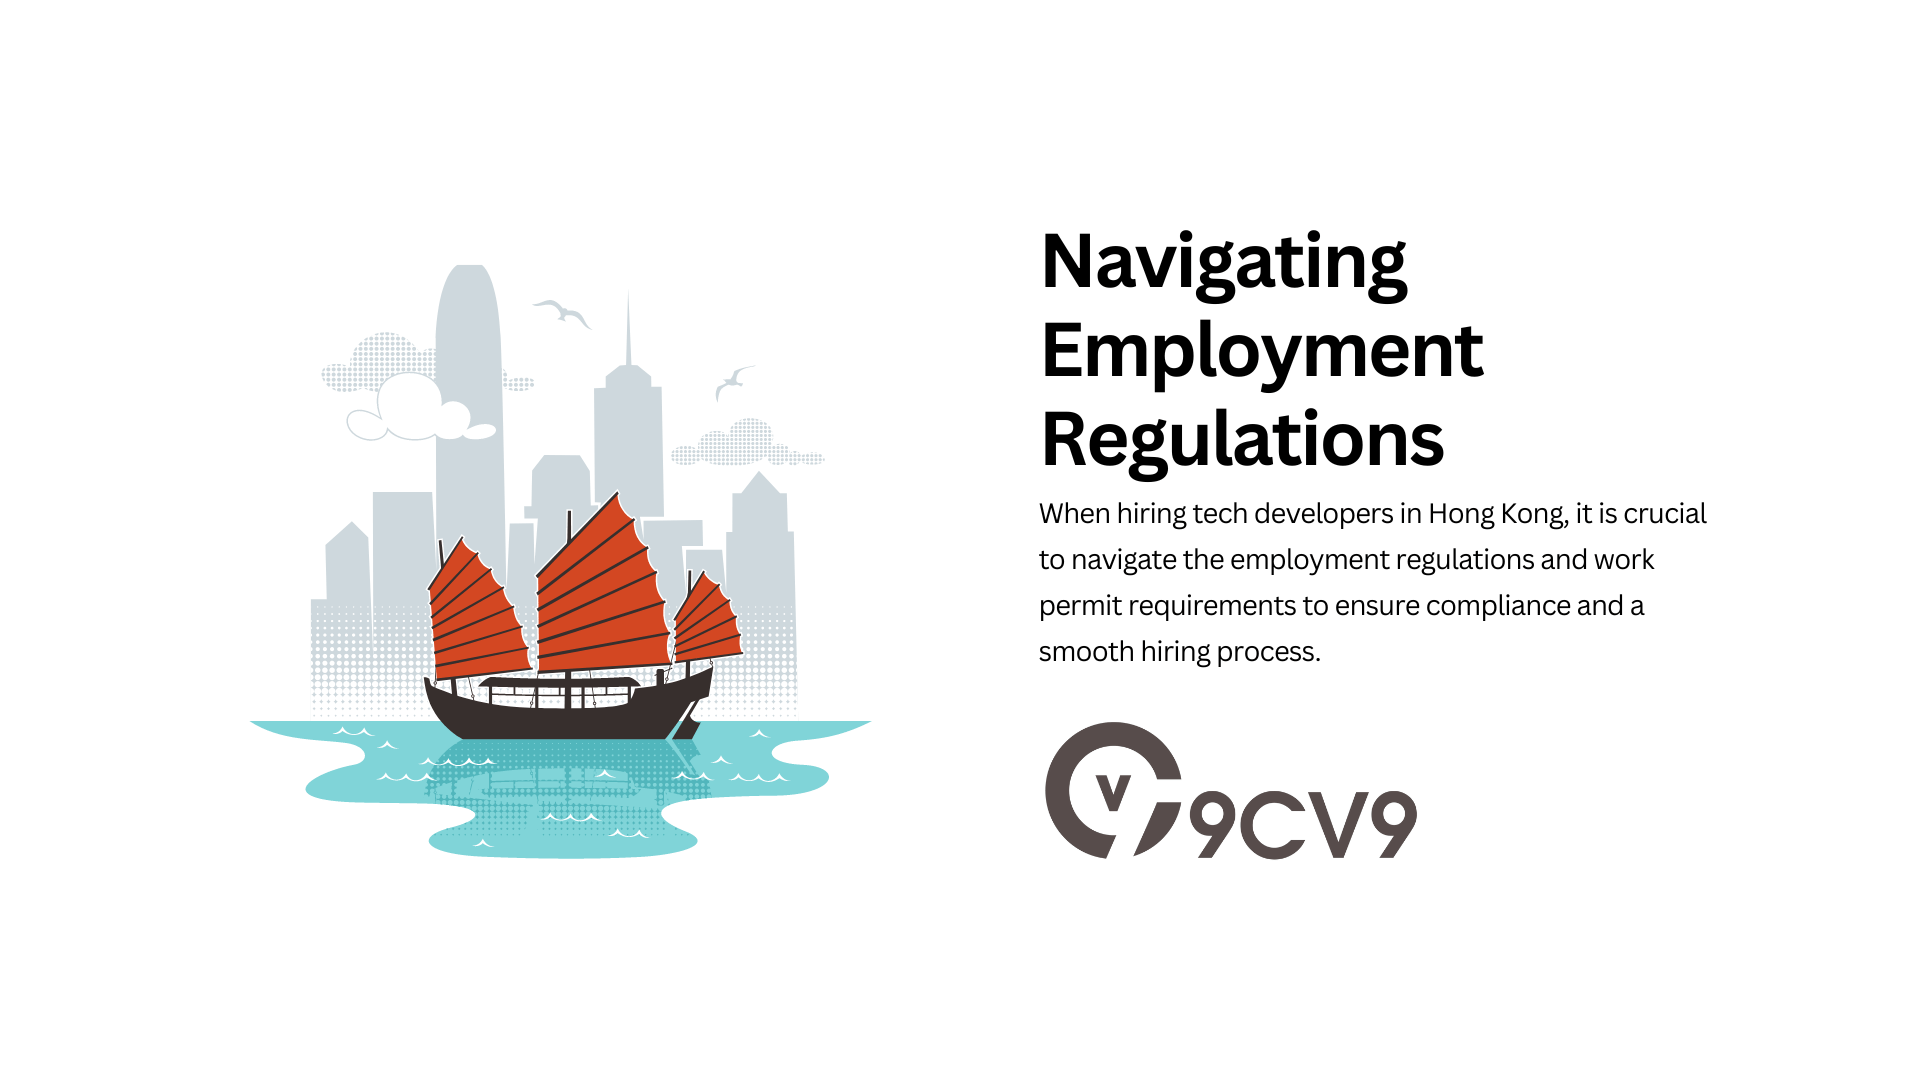 Navigating Employment Regulations and Work Permits for Tech Developers in Hong Kong